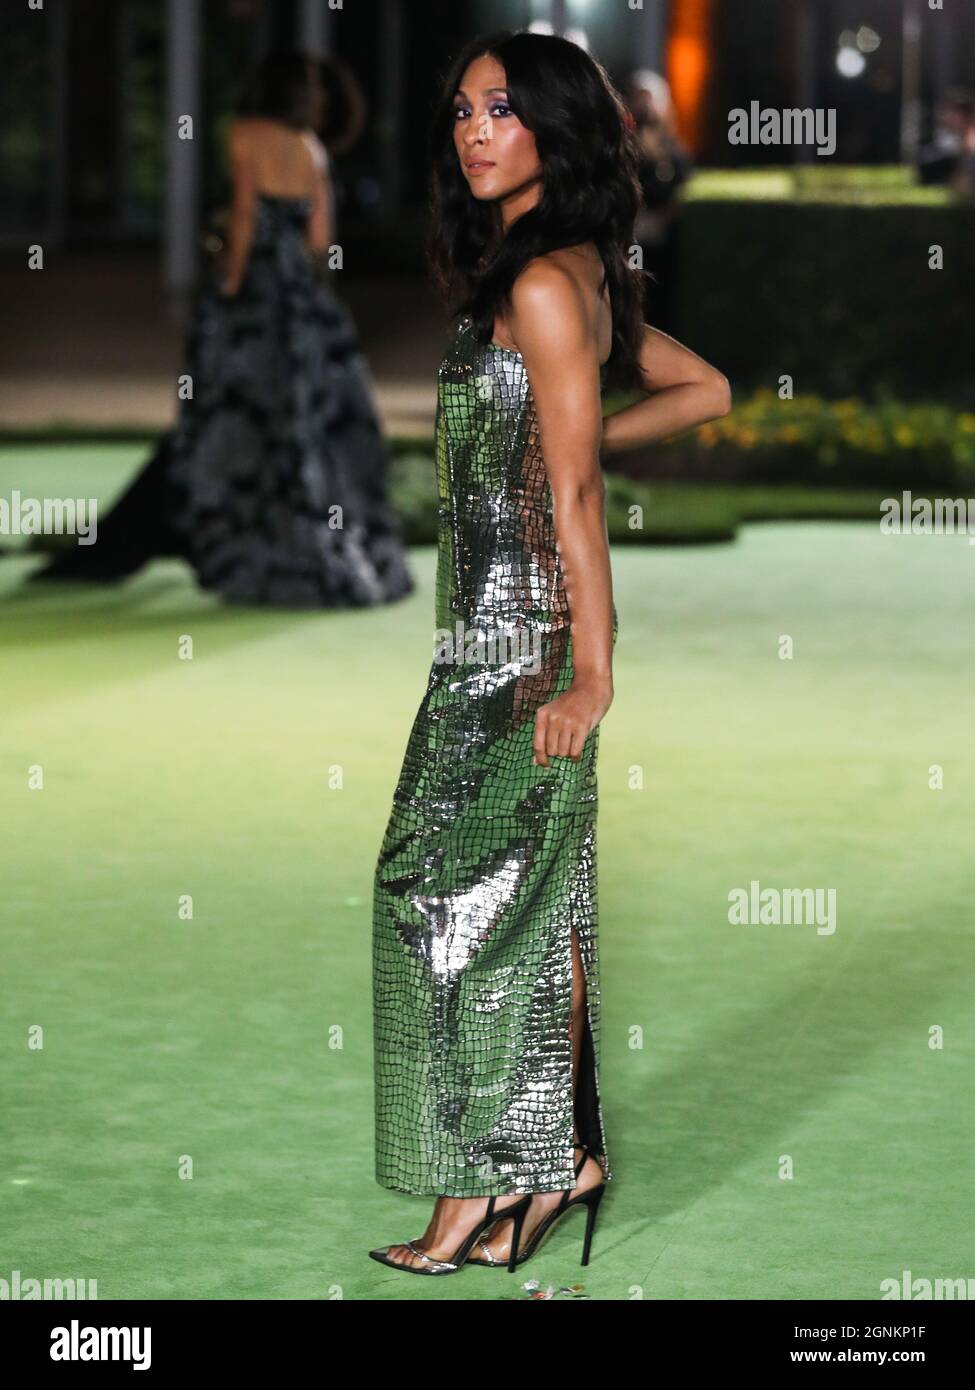 LOS ANGELES, CALIFORNIA, USA - SEPTEMBER 25: Actress Mj Rodriguez (Michaela  Antonia Jaé Rodriguez) wearing a Brandon Maxwell dress arrives at the  Academy Museum of Motion Pictures Opening Gala held at the